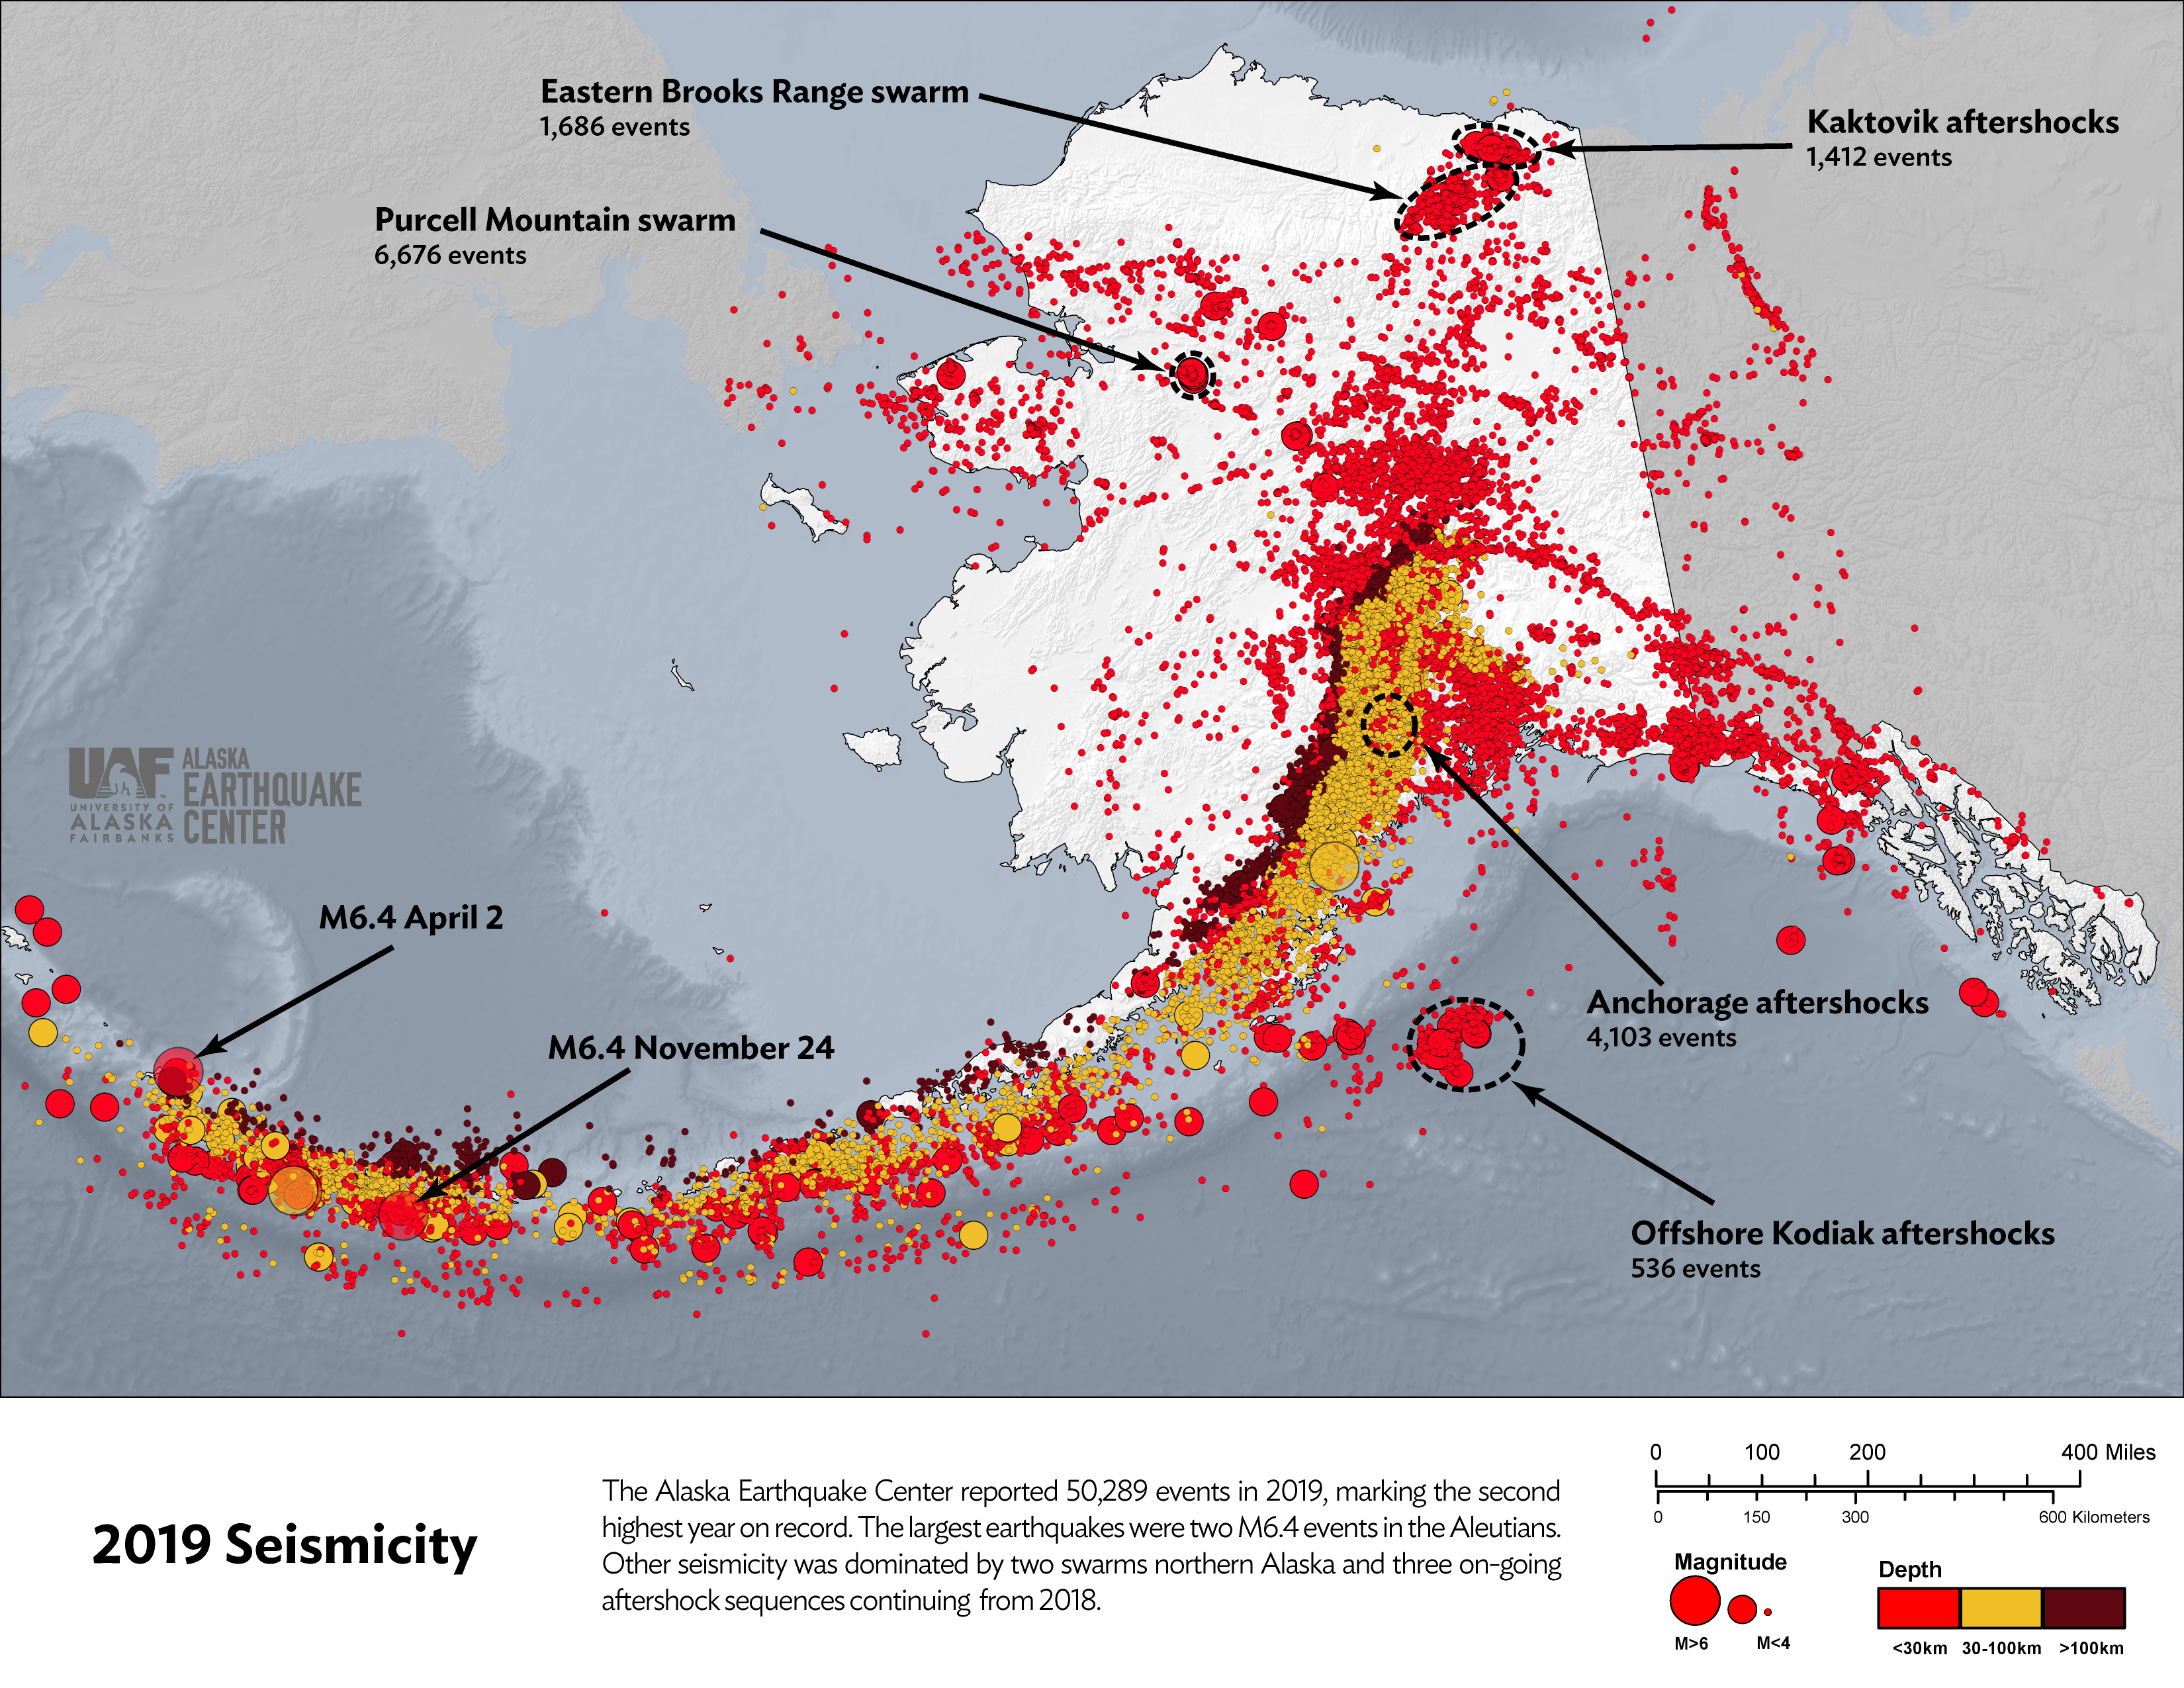 Figure 3. This map shows seismicity across Alaska for 2019. Areas with notable activity are highlighted.